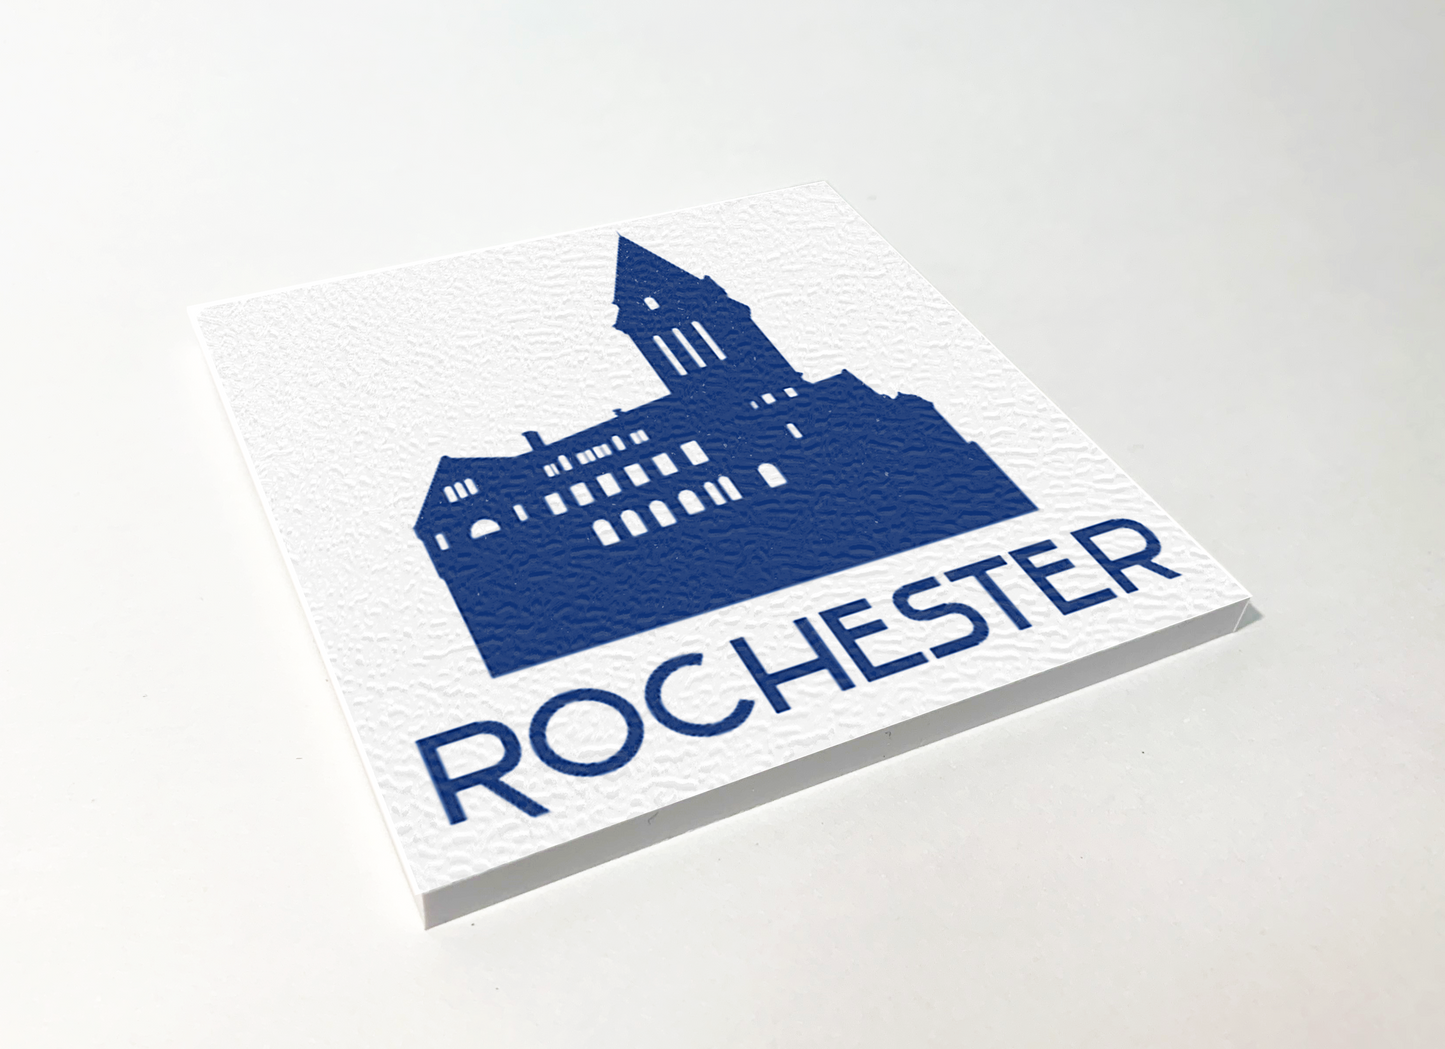 Rochester City Hall Blue ABS Plastic Coaster 4 Pack Designed and Handcrafted in Buffalo NY